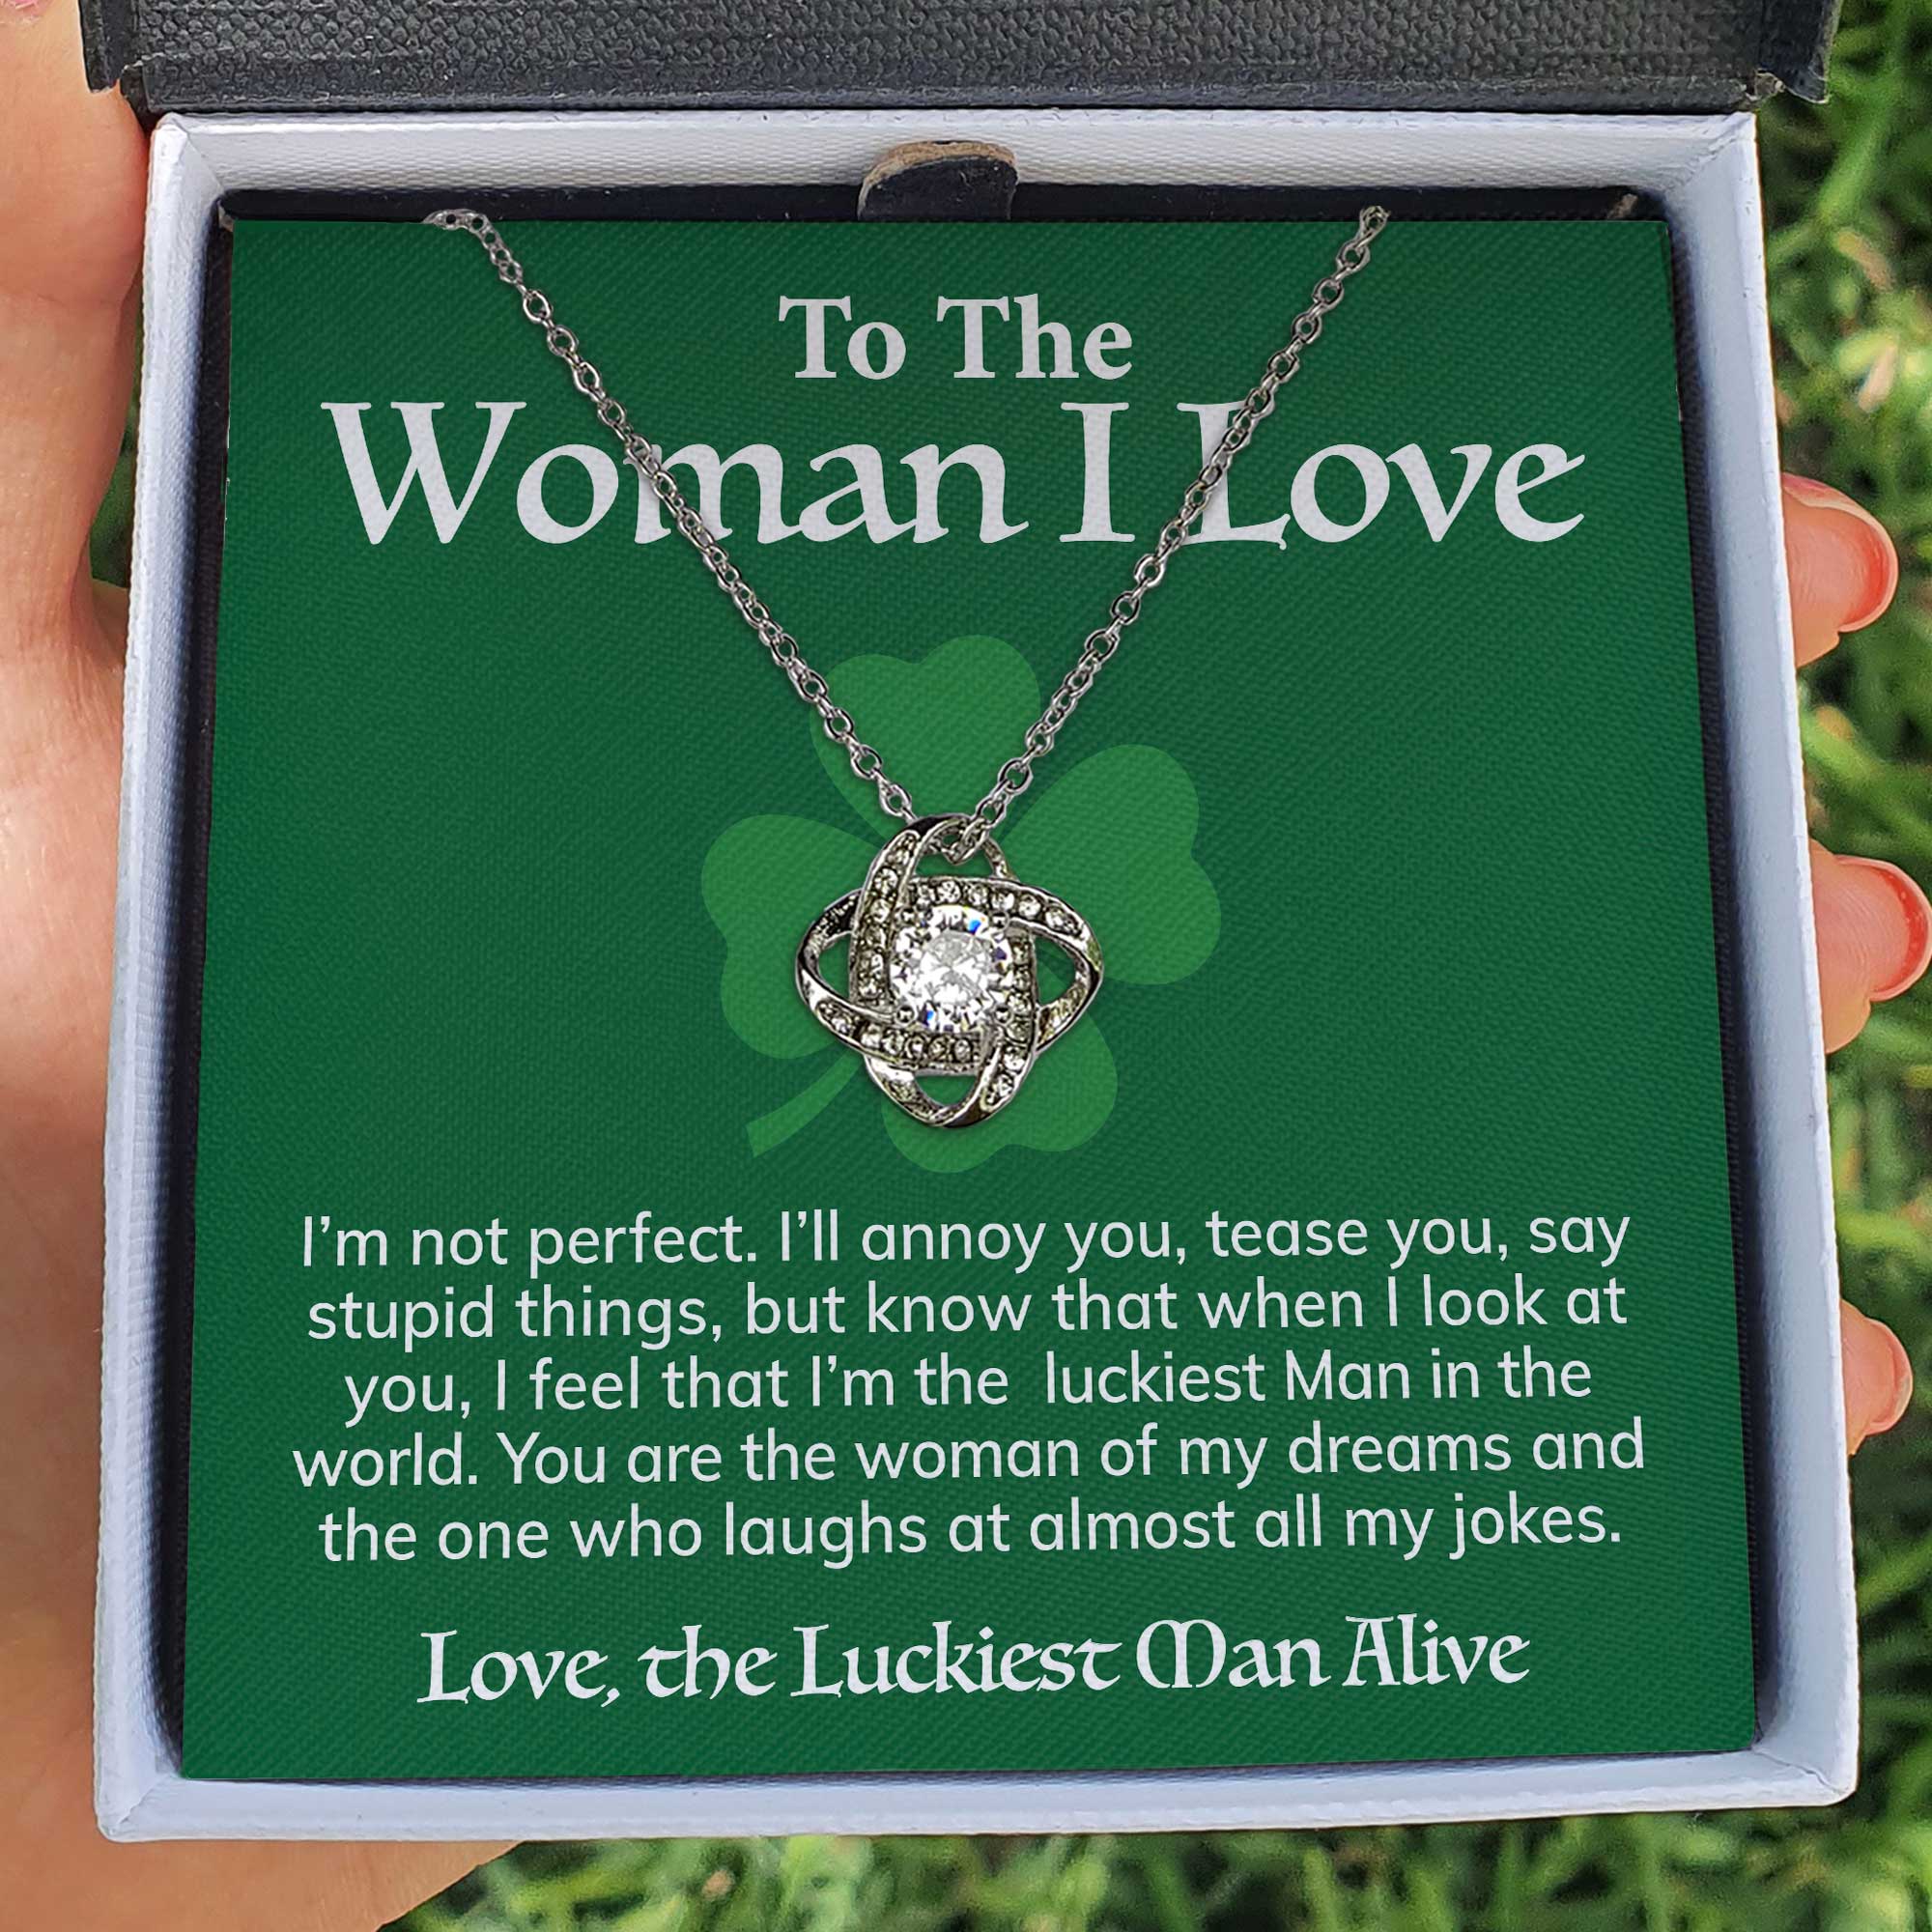 ShineOn Fulfillment Jewelry Standard Box To The Woman I Love - I'm Not Perfect - St. Patrick's Day